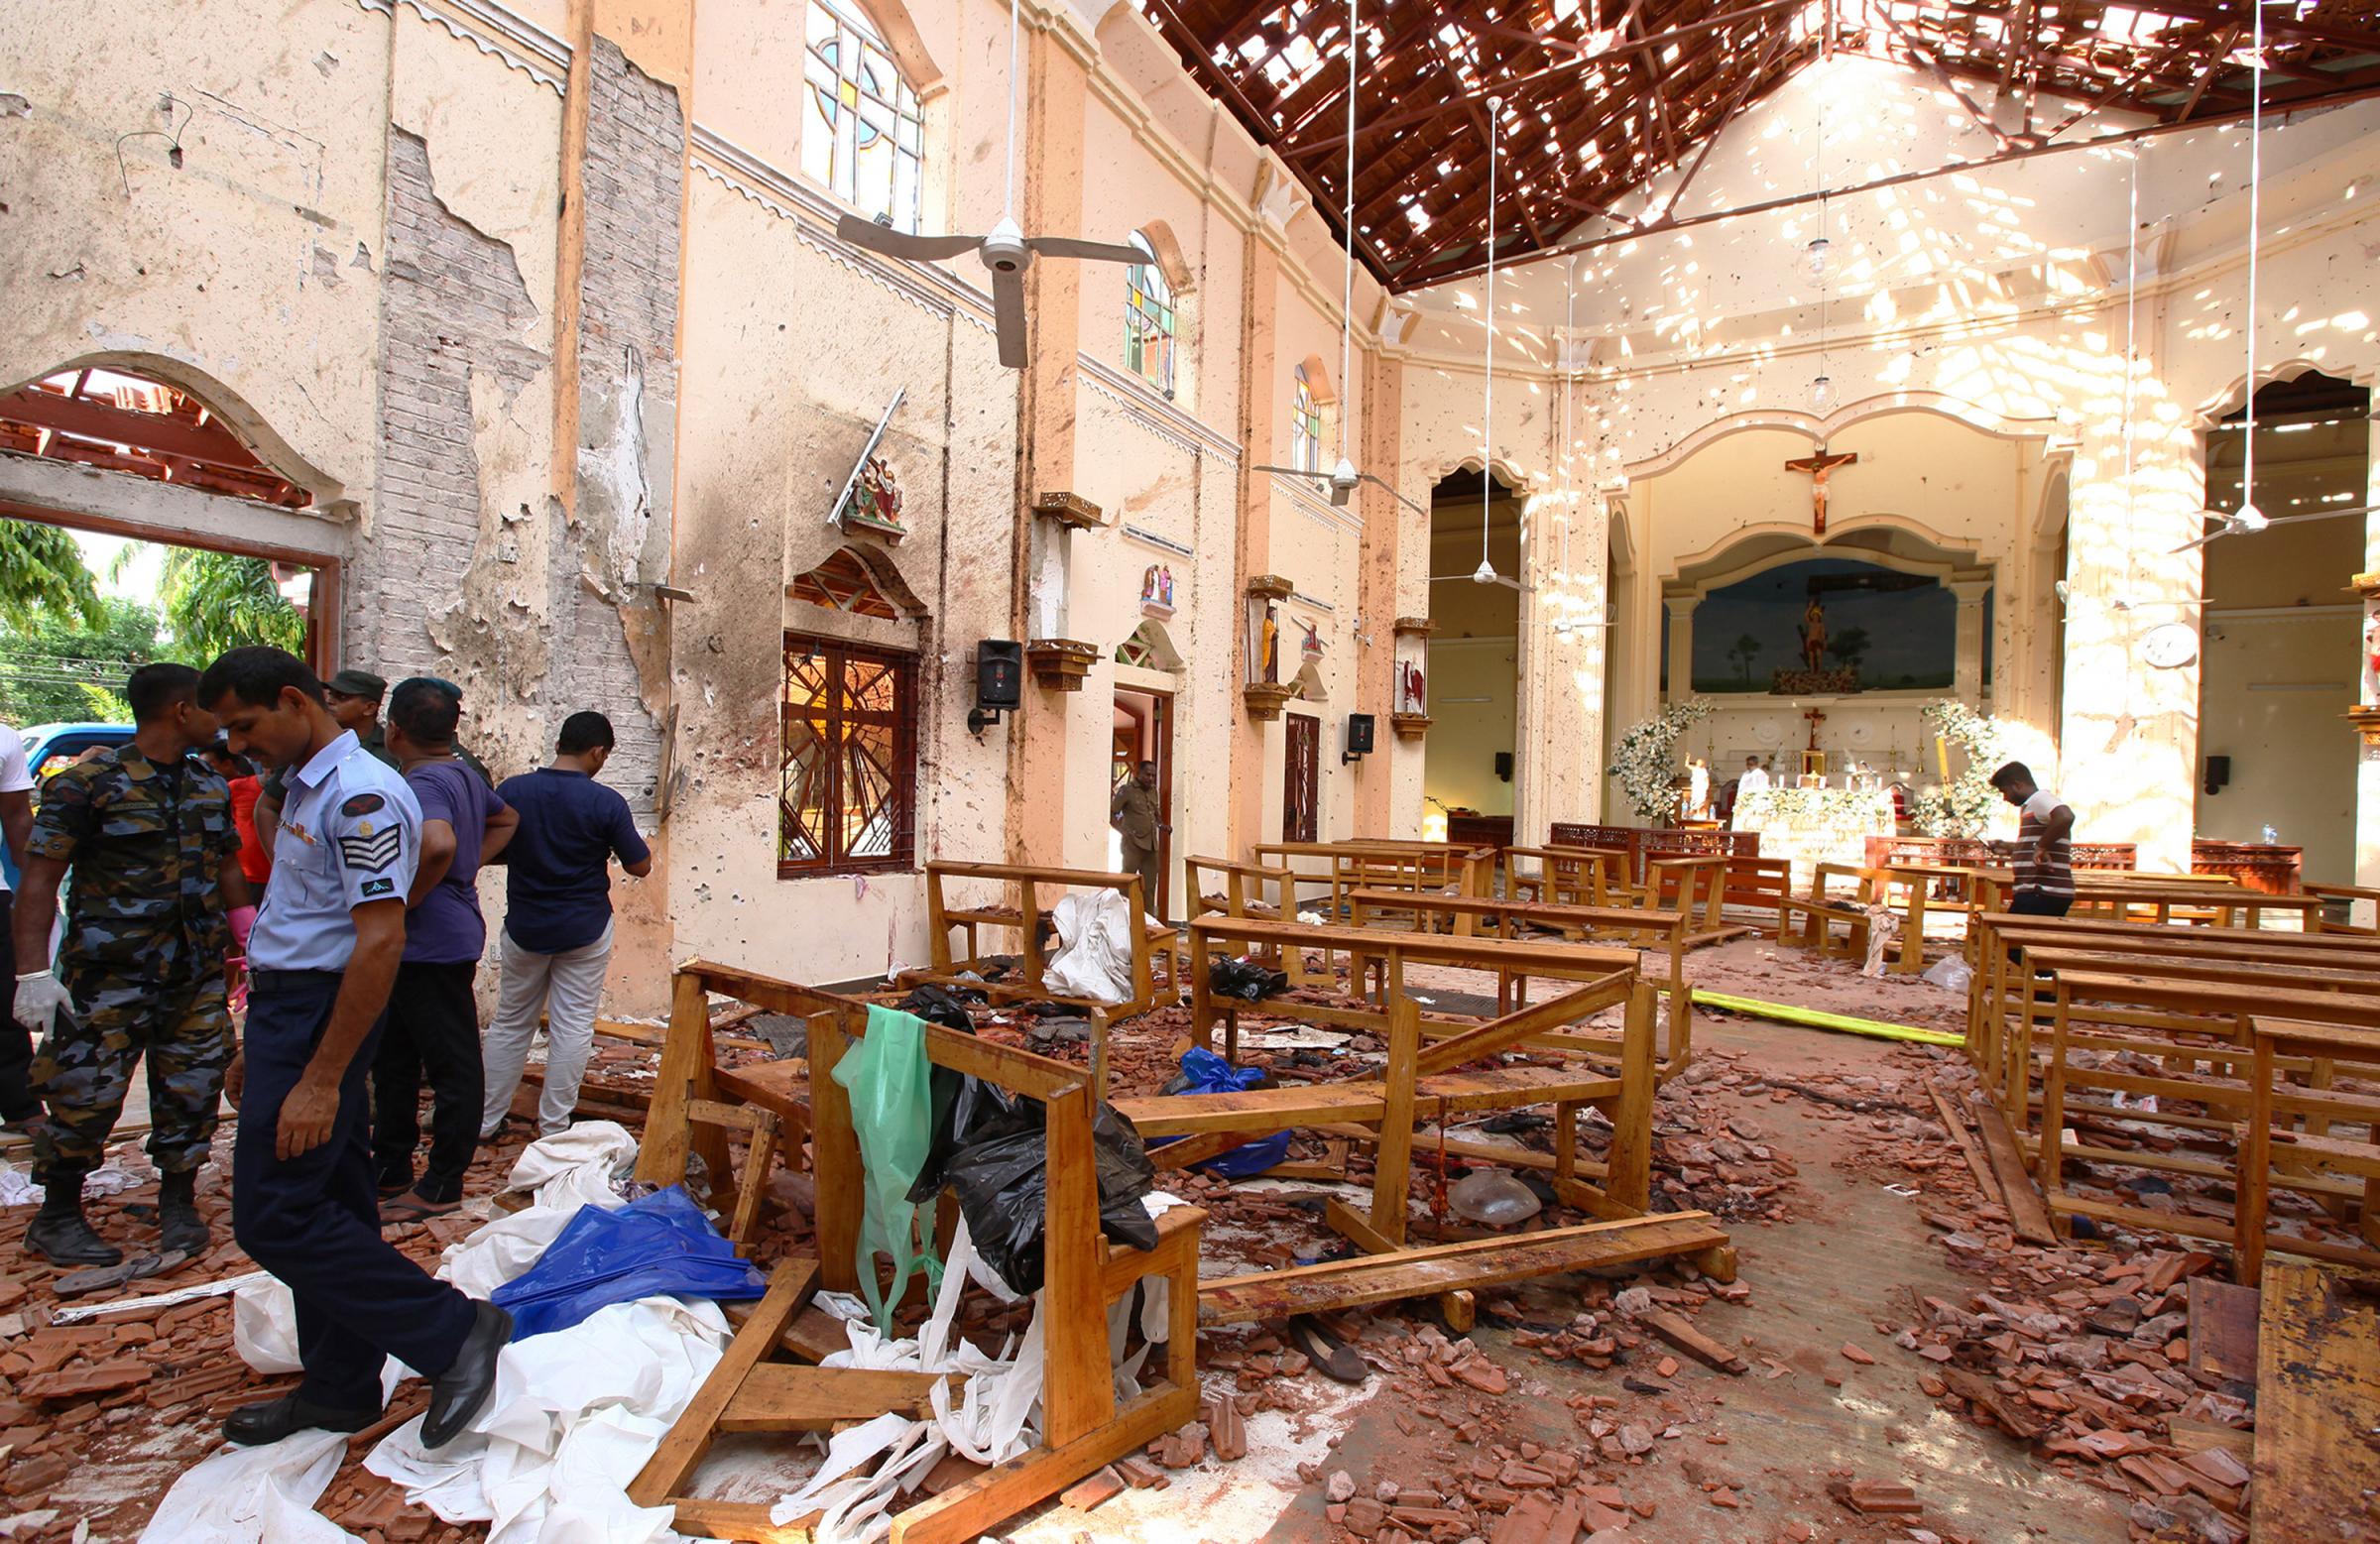 Sri Lankan officials inspect St. Sebastians Church in Negombo, north of Colombo, after multiple explosions targeting churches and hotels across Sri Lanka on April 21, 2019, in Negombo, Sri Lanka. At least 207 people have been killed and hundreds more